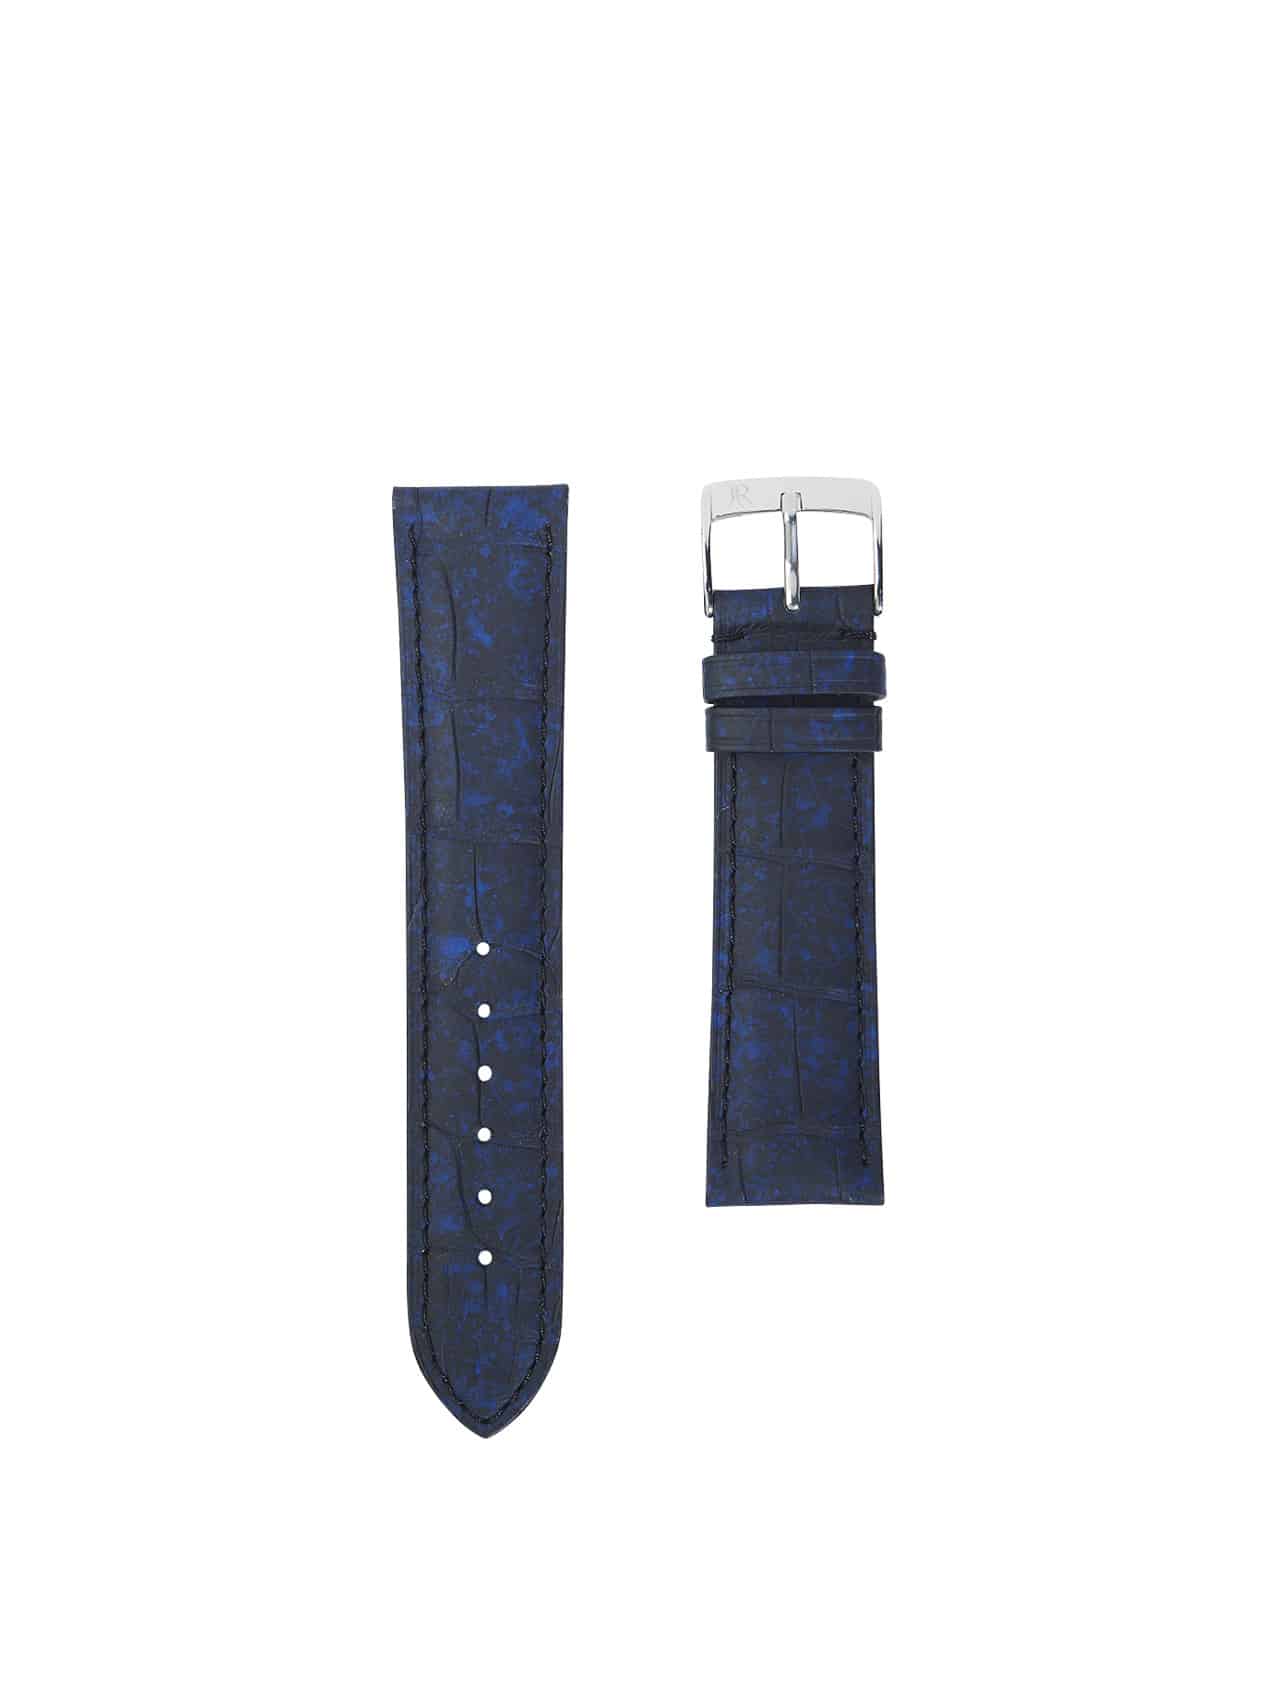 Watch strap 3.5 Asteria rubber touch crocodile blue front